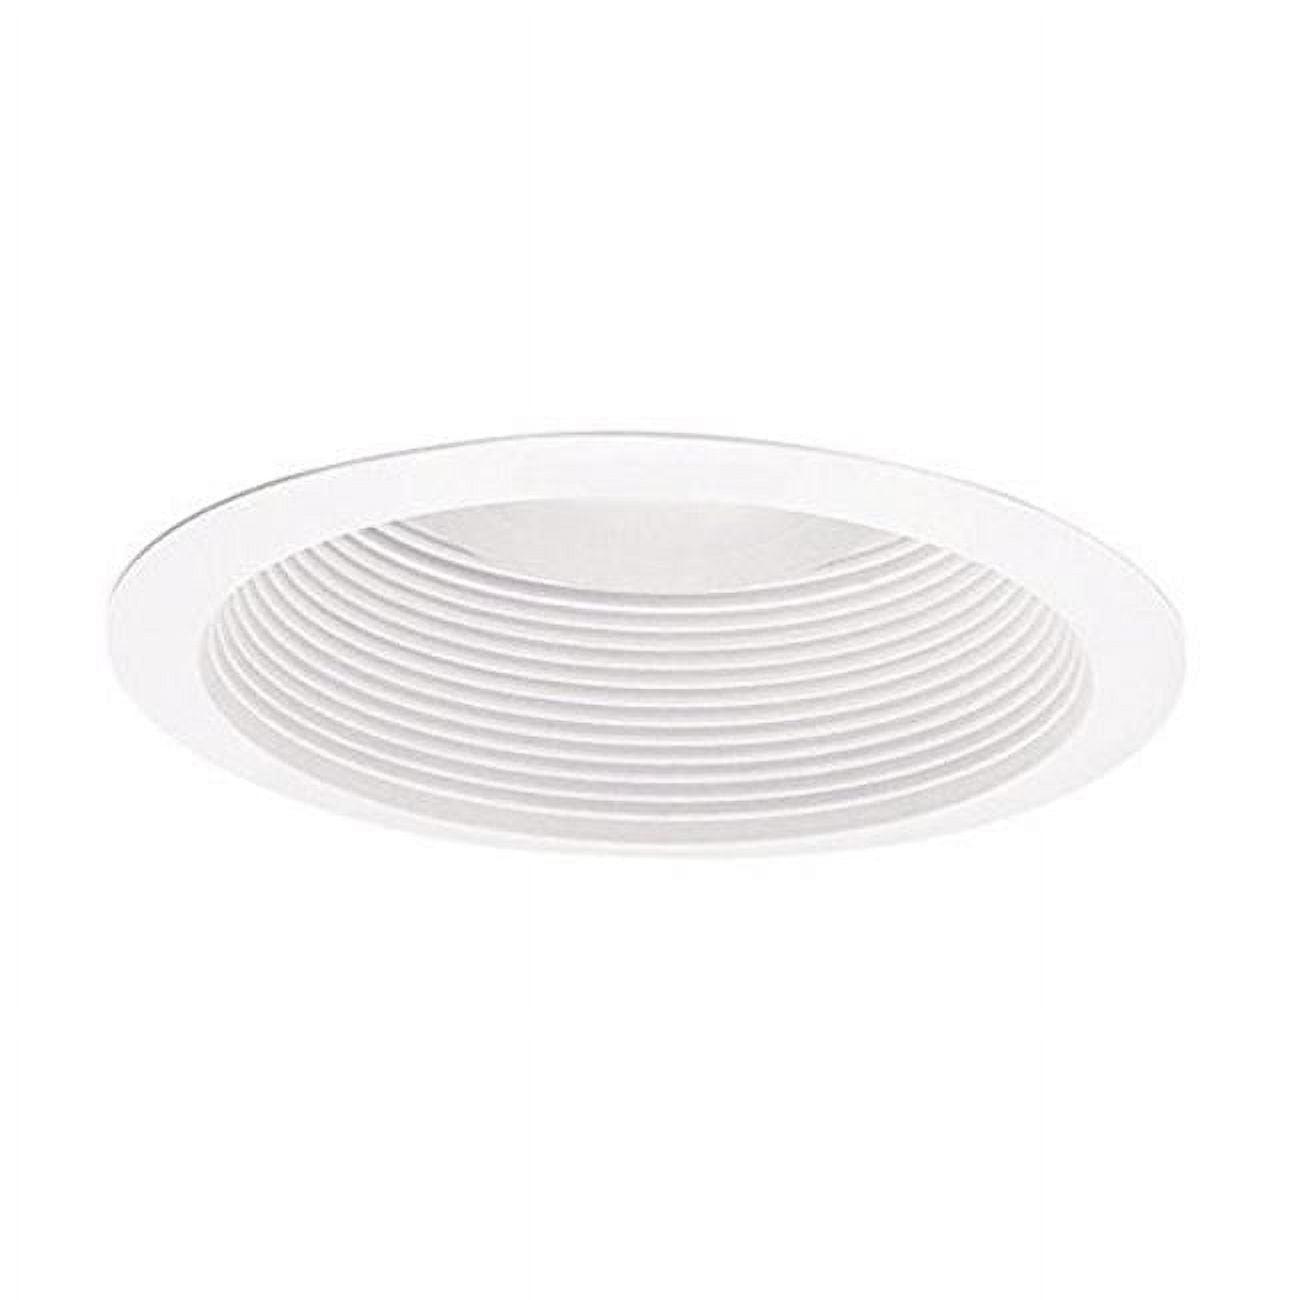 Re-6125wb 6 In. Recessed Lighting Full Cone Baffle With Self Flanged White Trim Ring - White